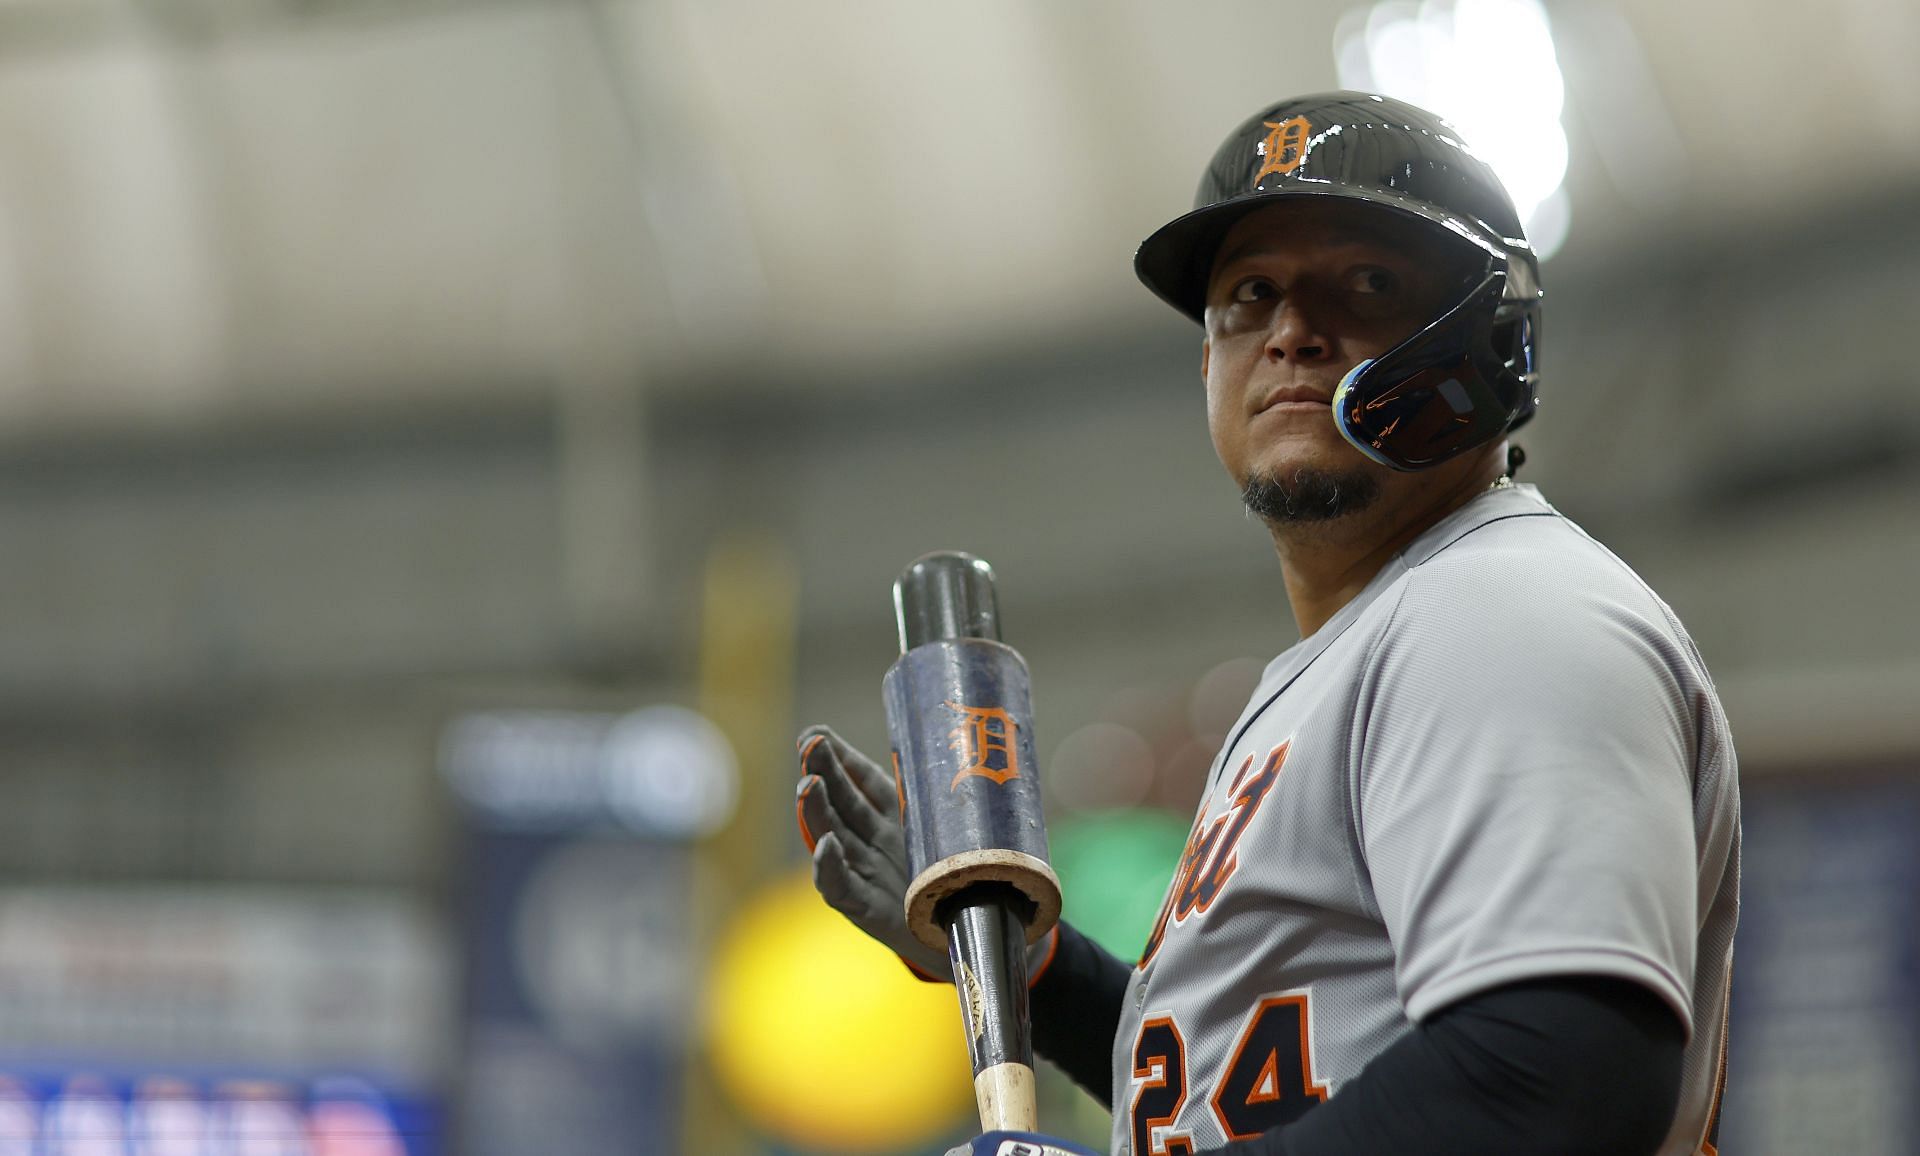 Affair and Such” Miguel Cabrera 3 Kids With Wife Rosangel Cabrera